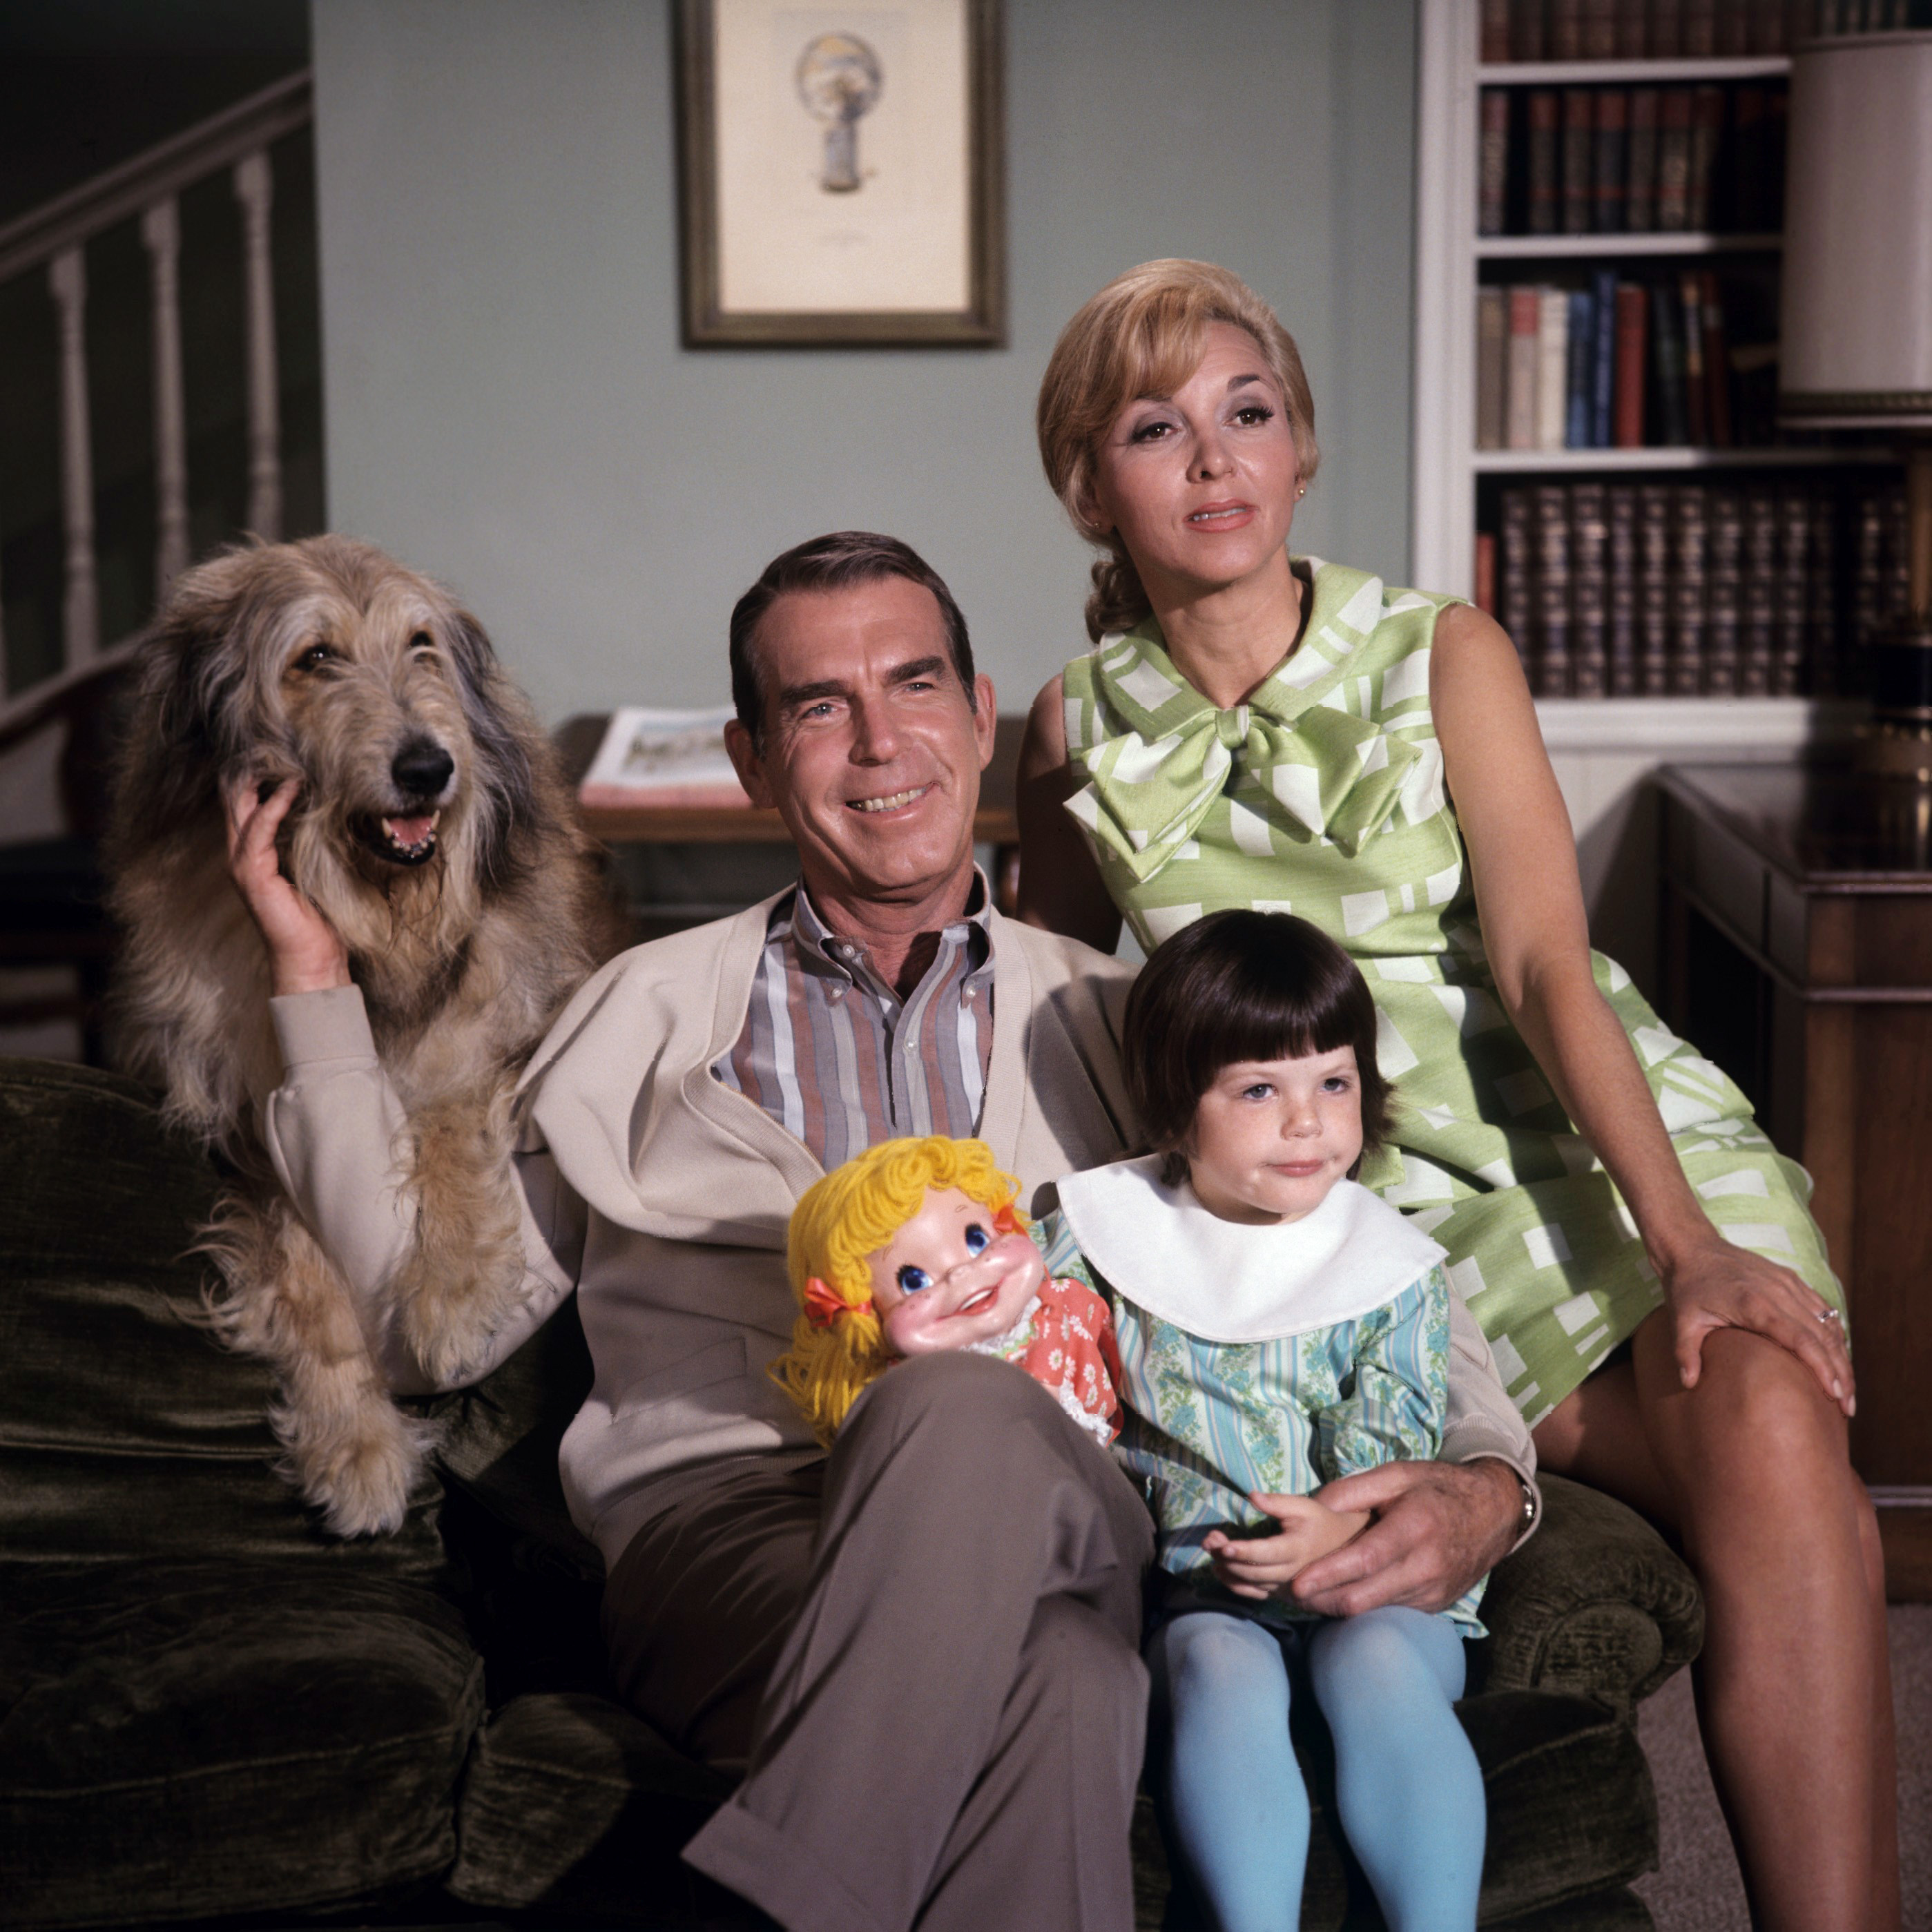 Fred MacMurray, Dawn Lyn, Beverly Garland in "My Three Sons," 1969 | Source: Getty Images